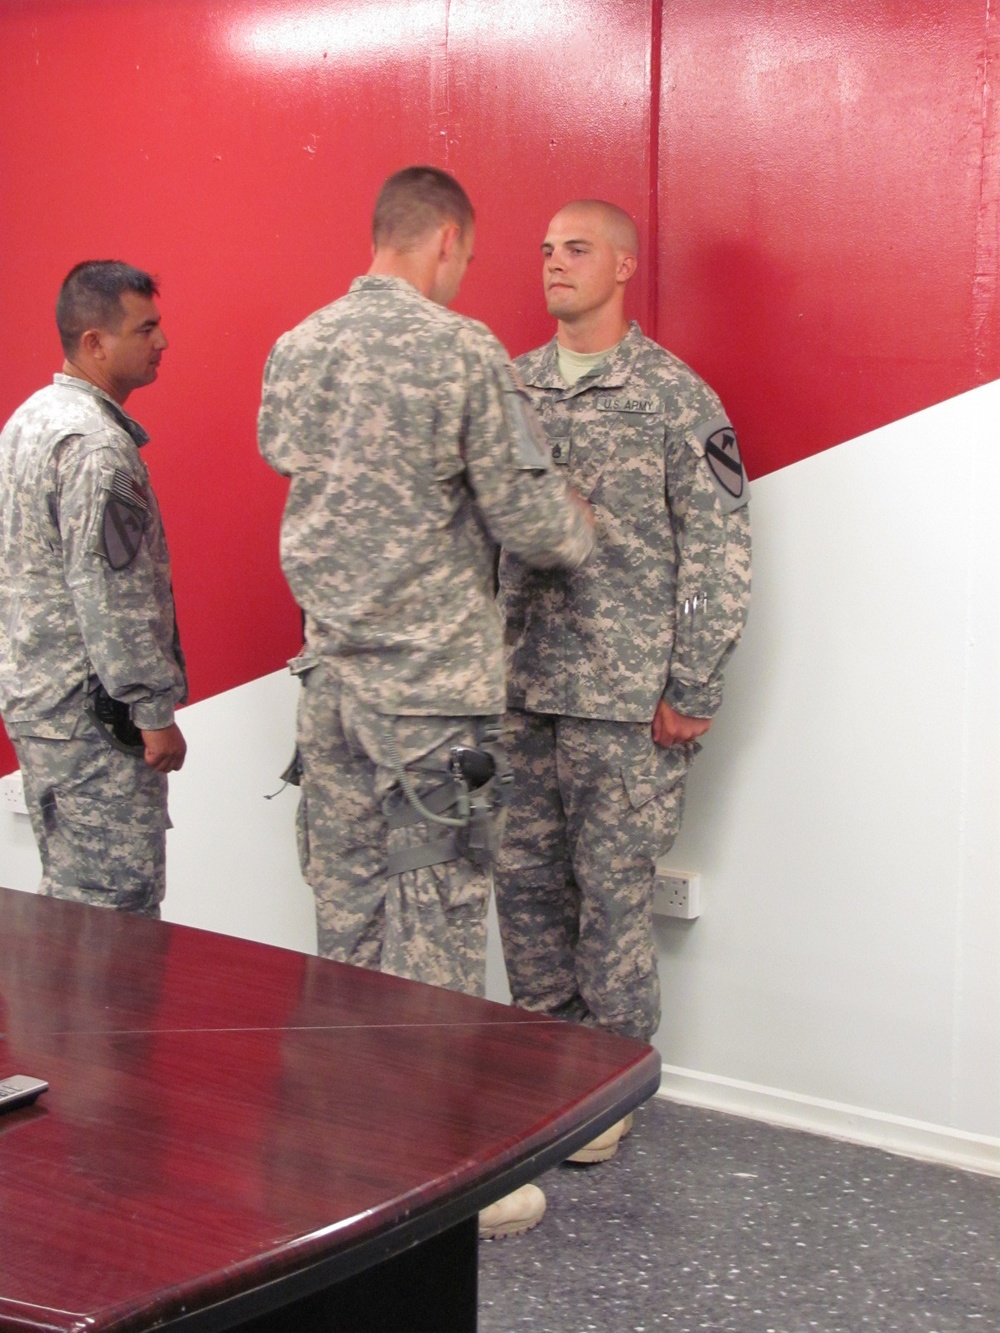 Promotions in Iraq watched at Fort Hood